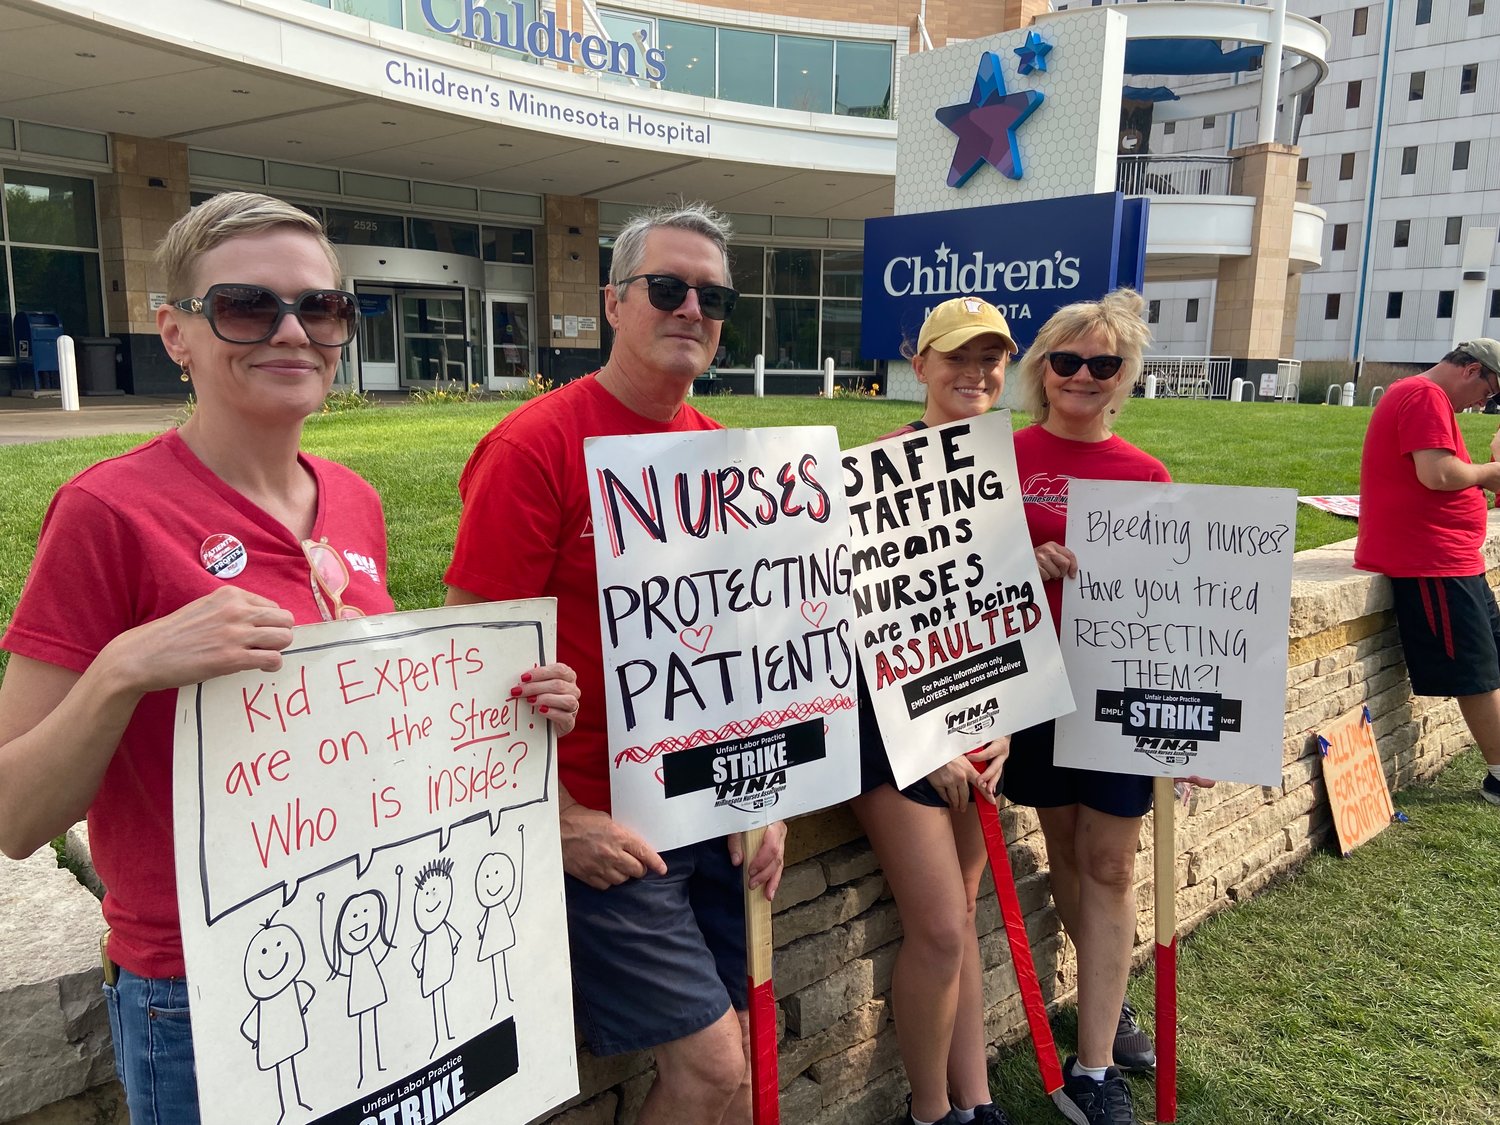 Tricia Ryshkus (far left) and Susan Gerome (far right) are nurses at Children's Hospital Minnesota, Minneapolis, 2525 Chicago Ave, striking for safe staffing and retaining nurses. Gerome has been working Children's Minneapolis for 37 years.